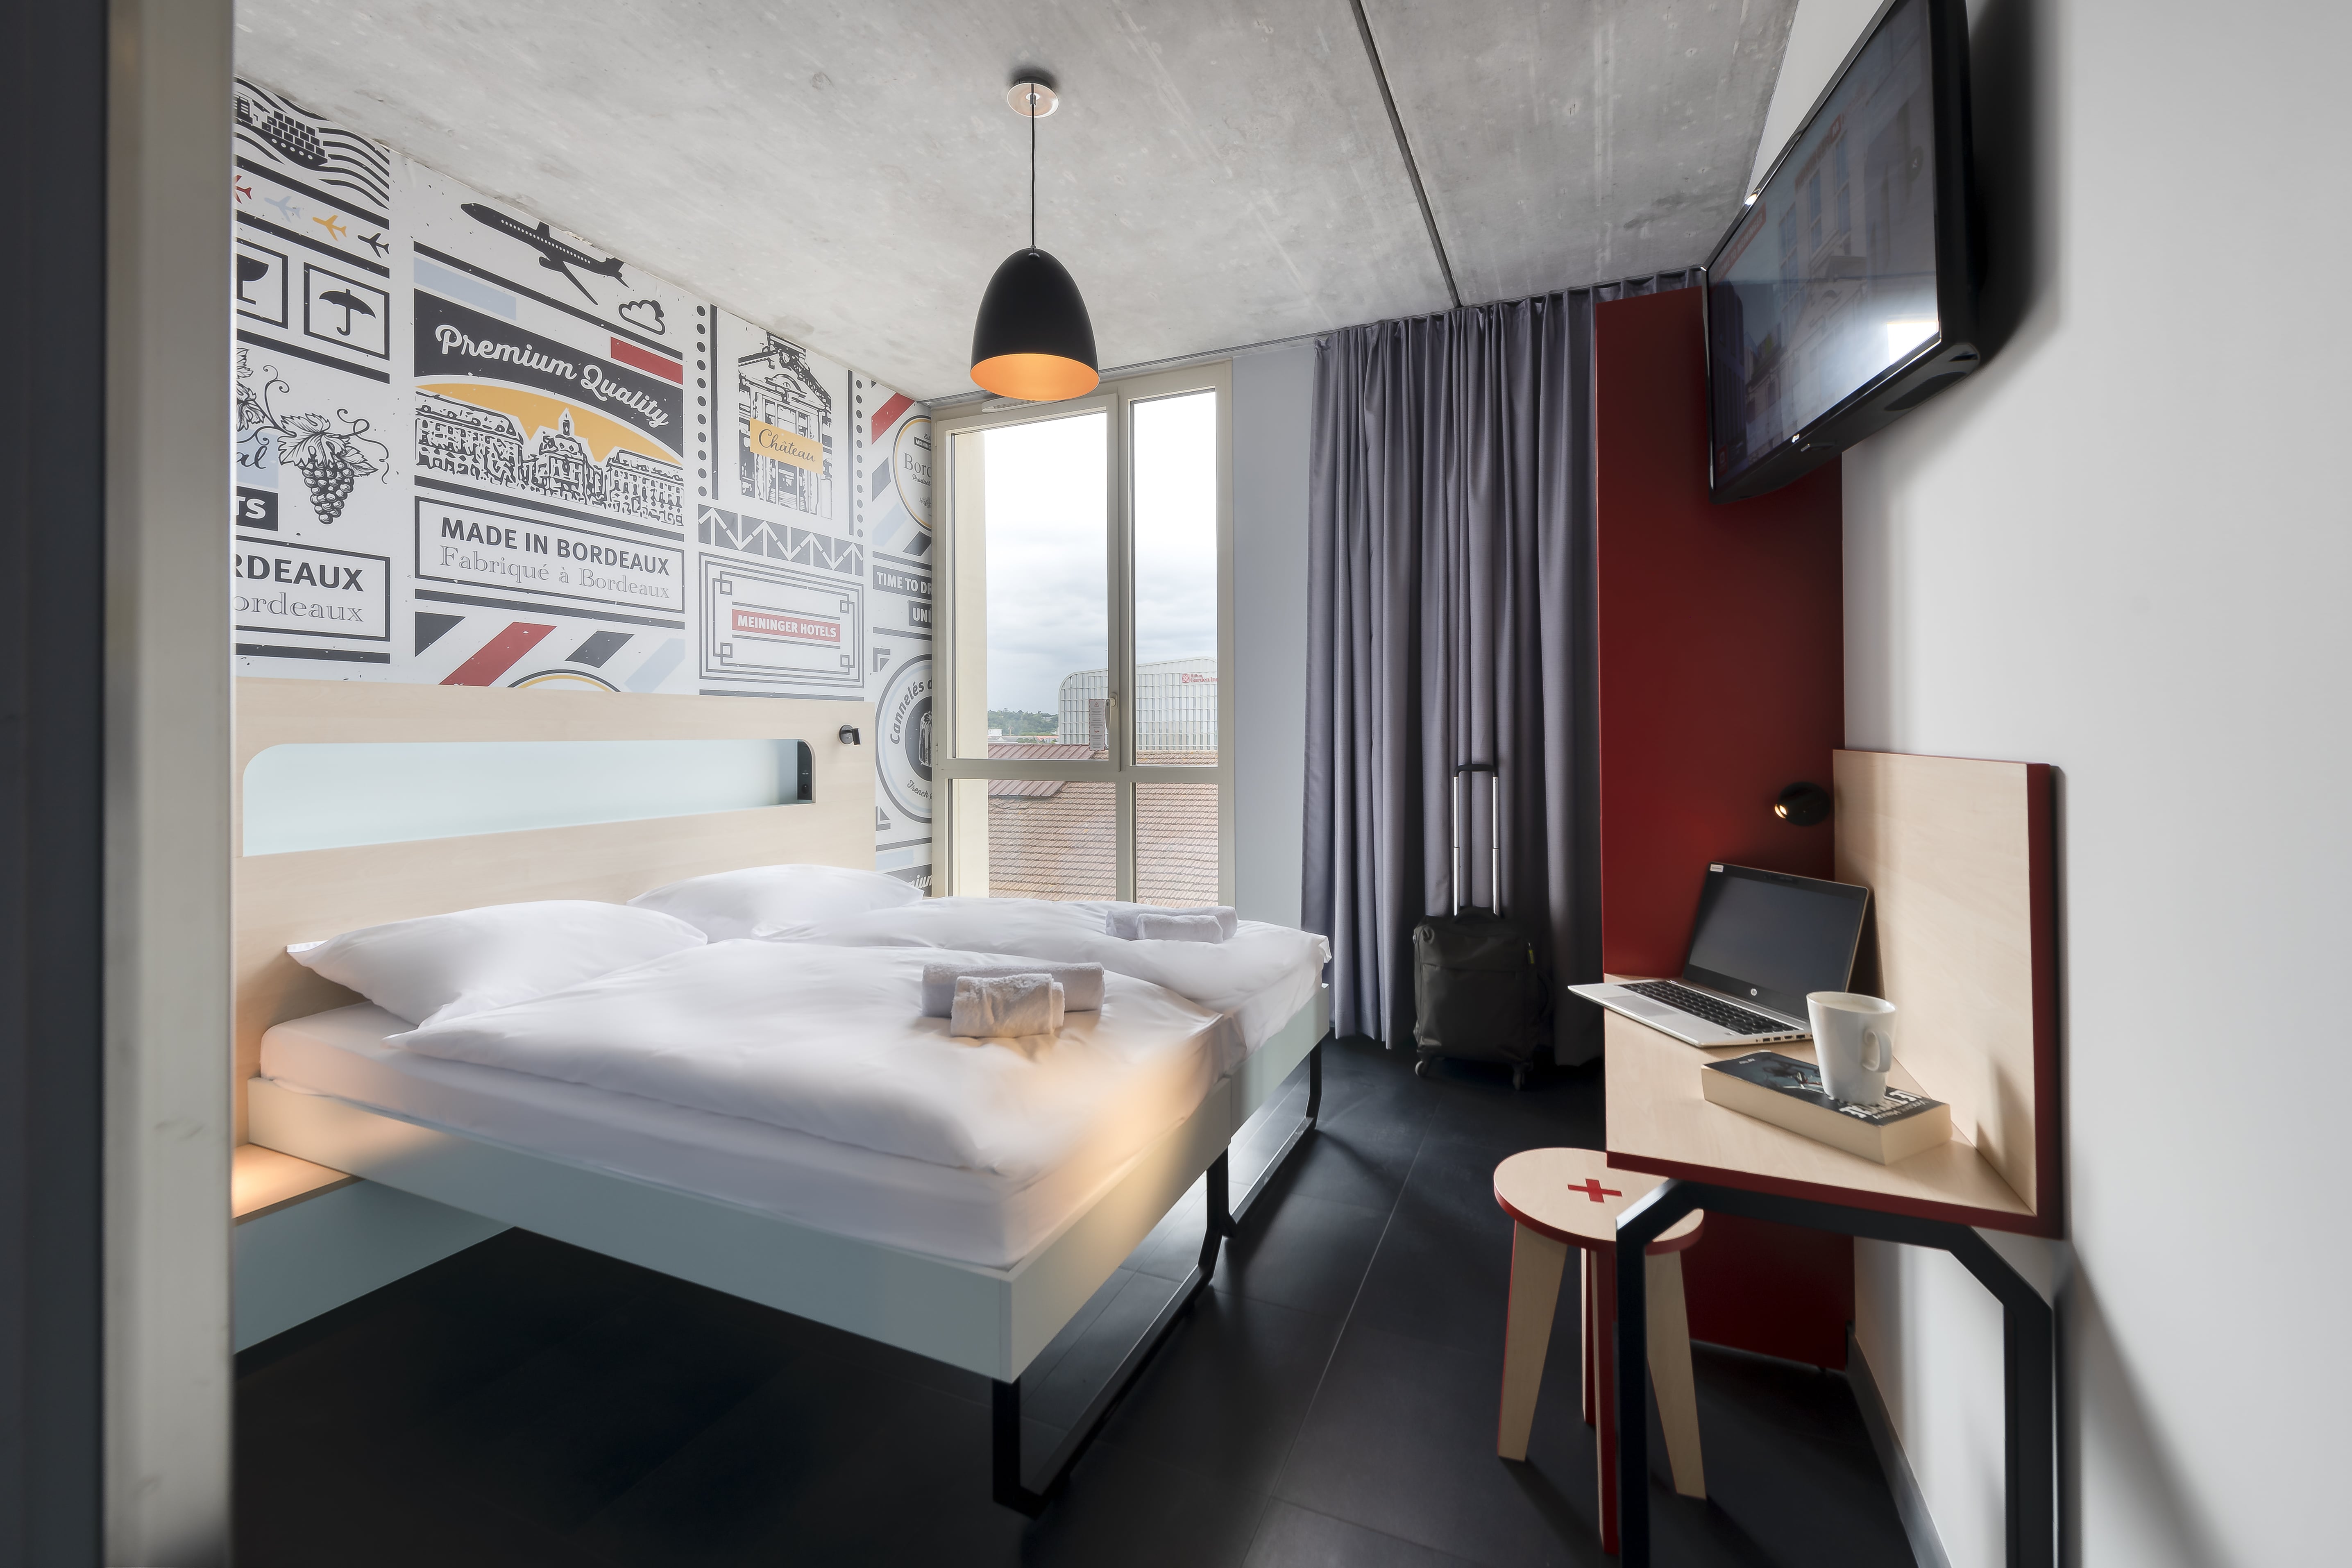 Expansion in 2021: The second of five new hotels opens in Bordeaux in May